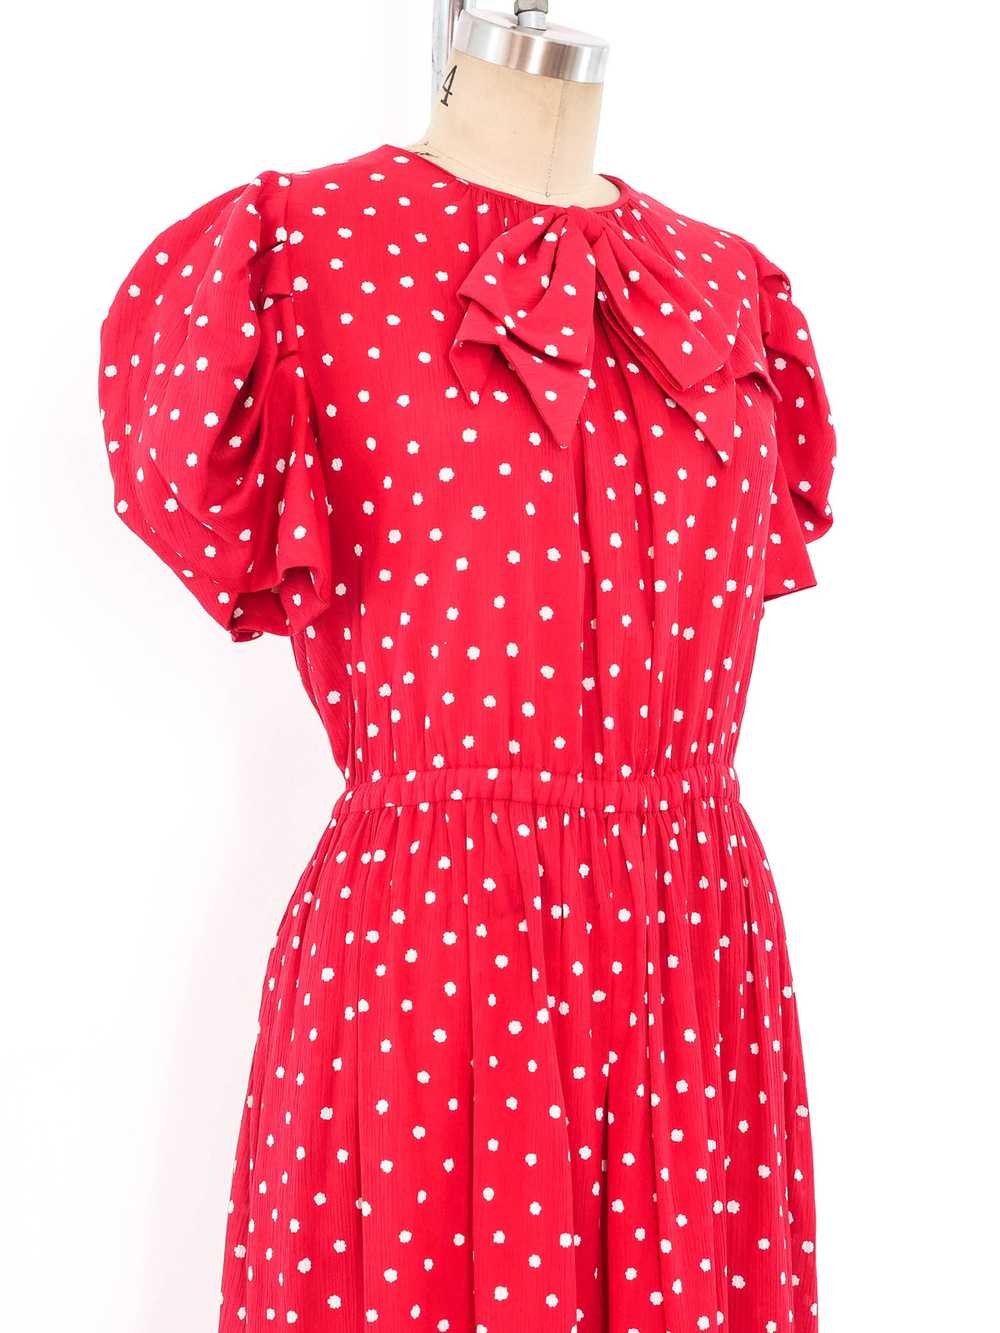 Jean Patou Dotted Red Dress - image 4